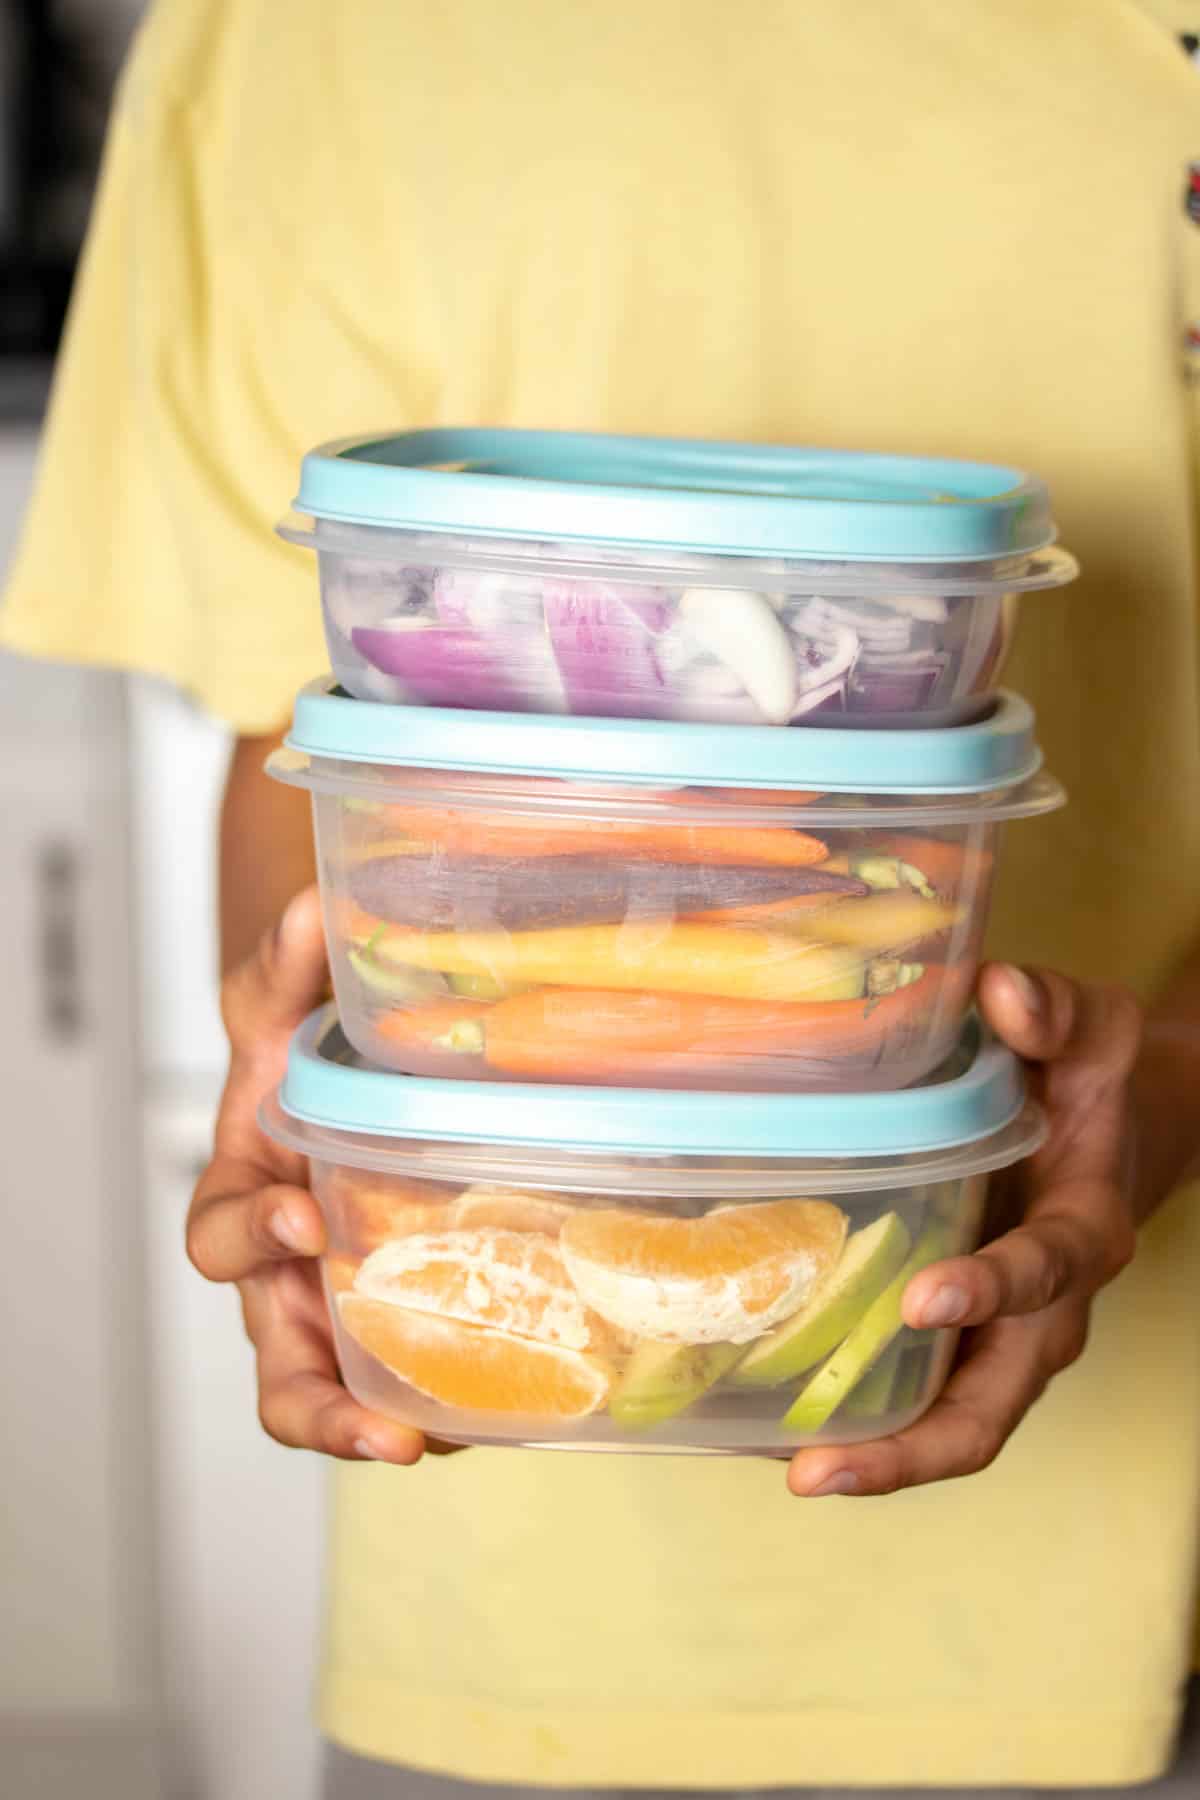 Hands of a person wearing a yellow shirt holding a stack of three containers with blue lids.